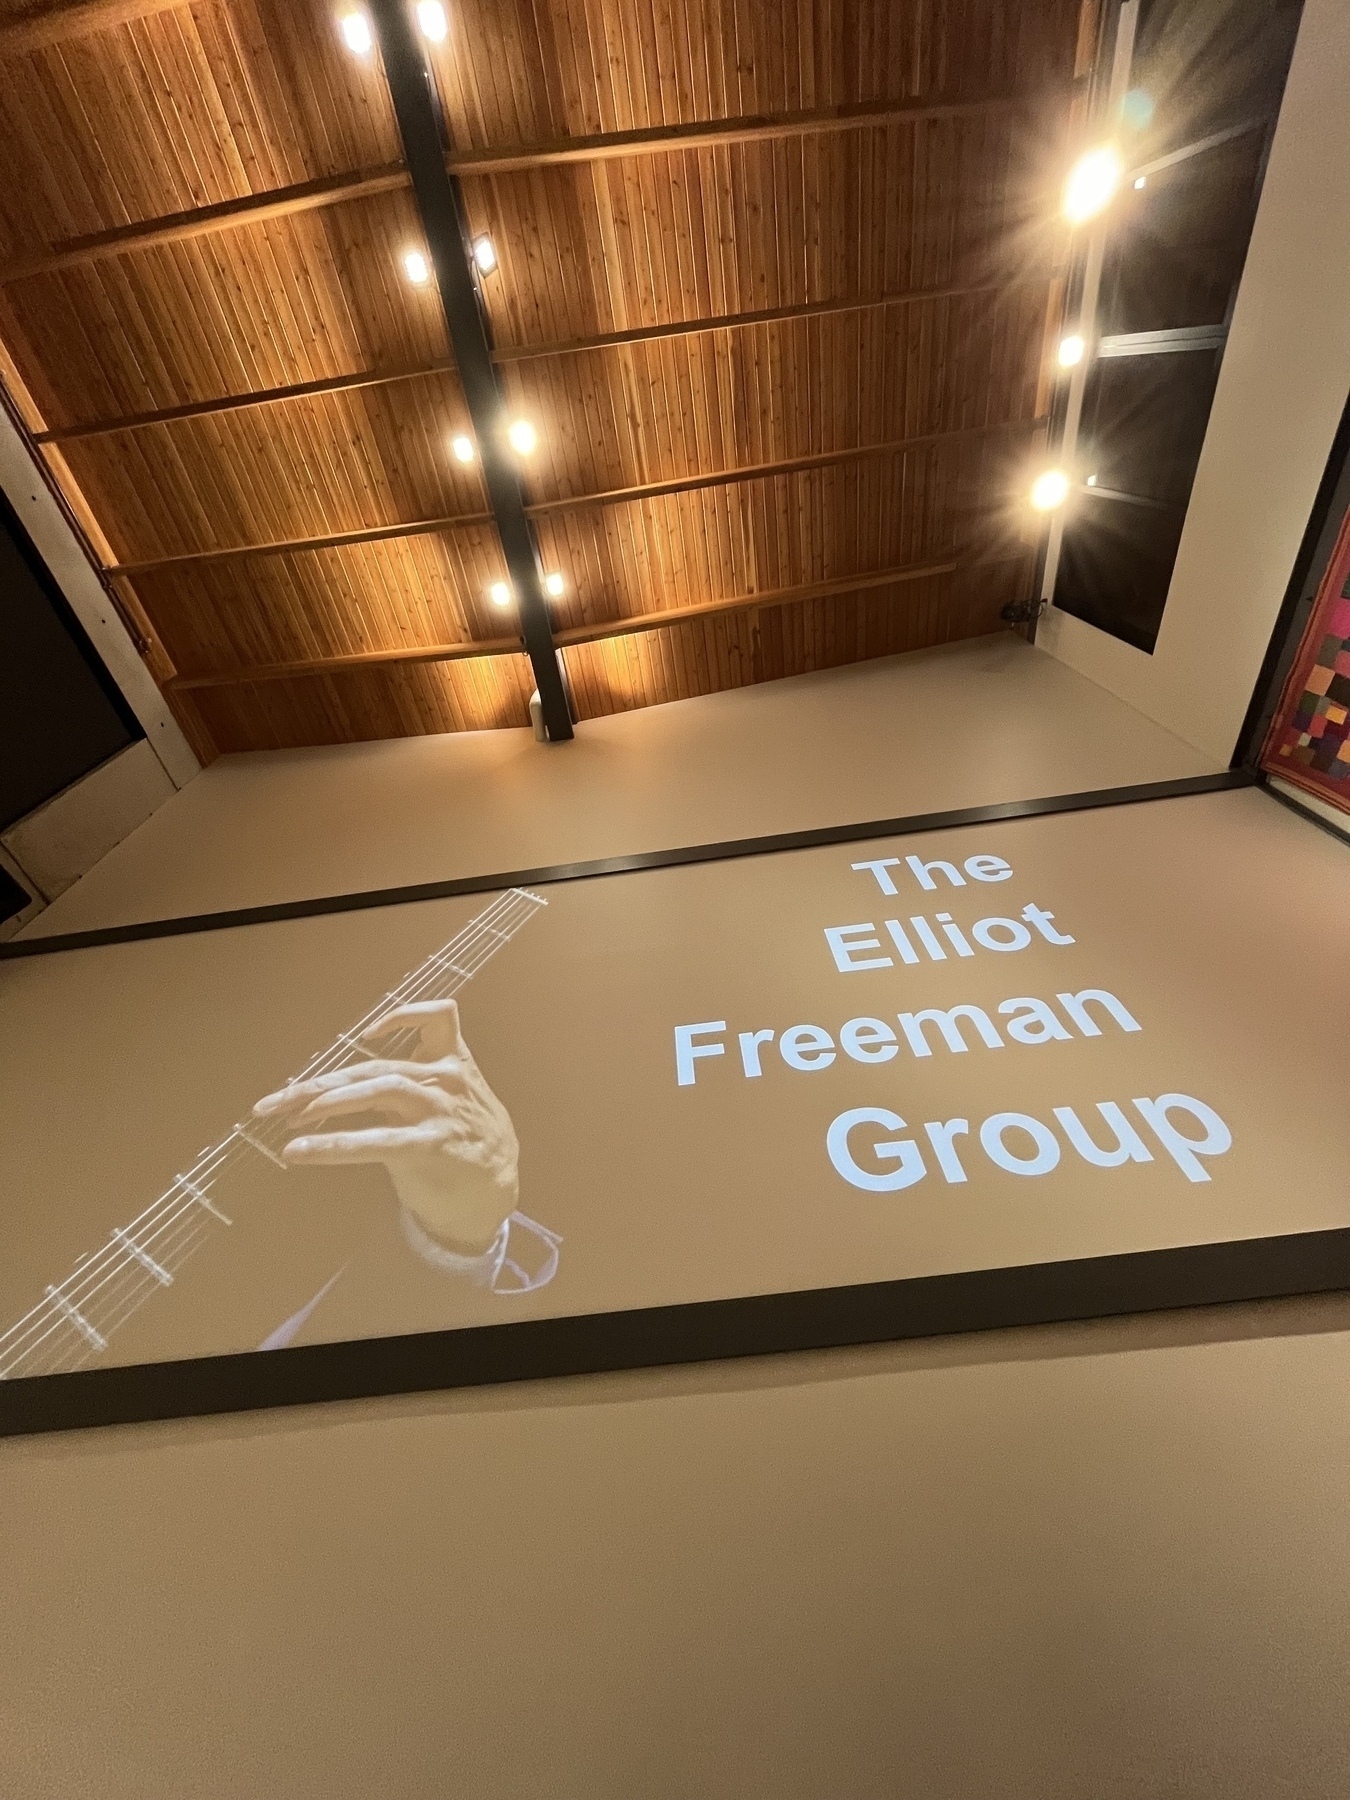 The Elliot Freeman Group displayed on a digital projection on a large wall